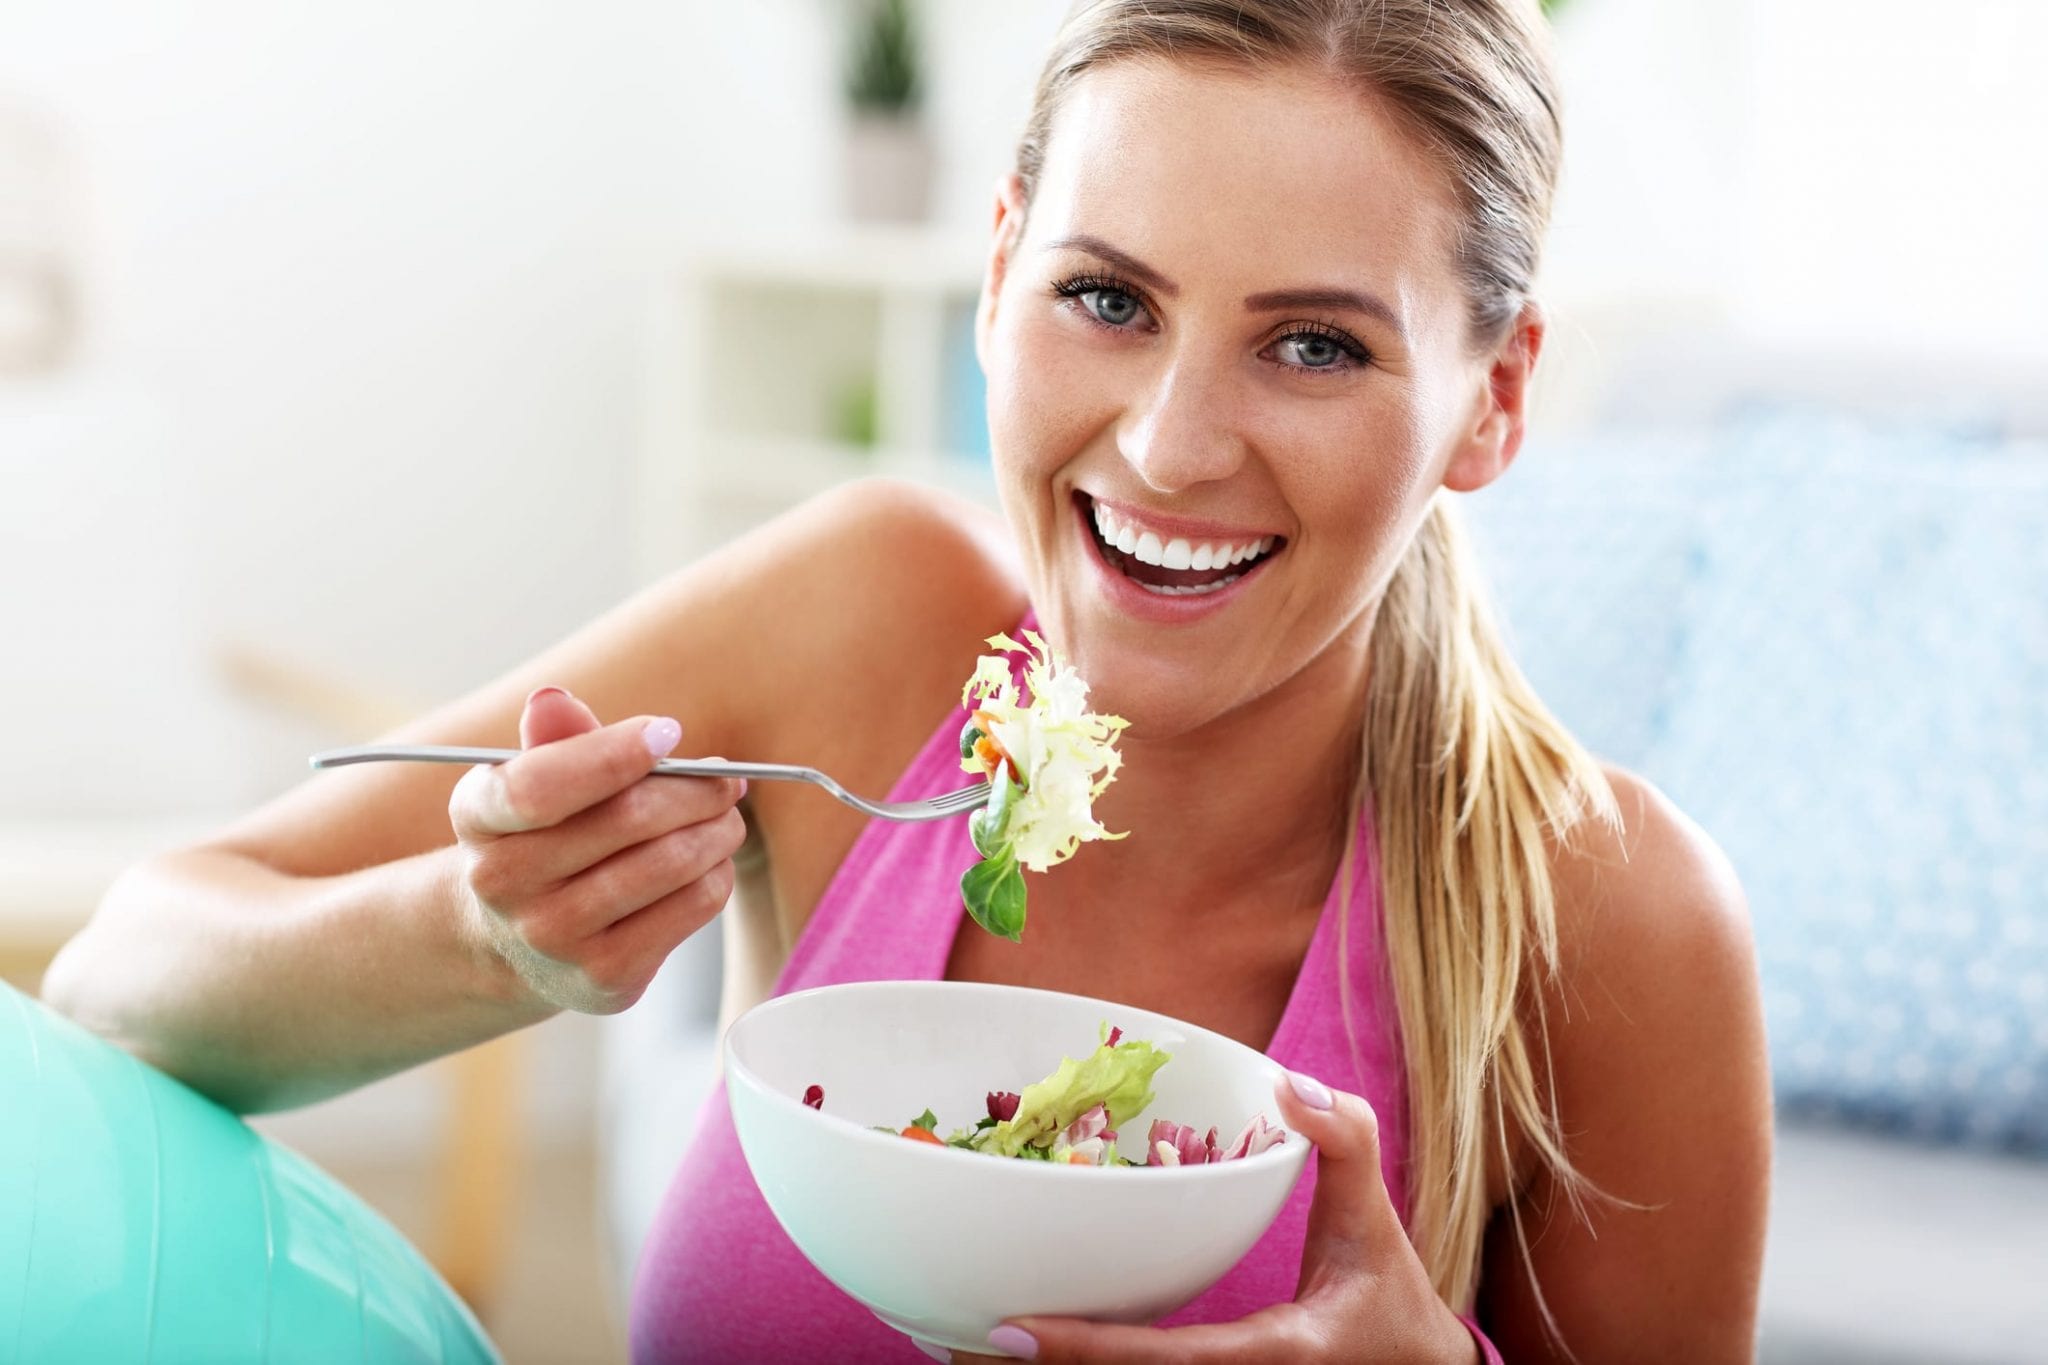 Woman Eating And Smiling